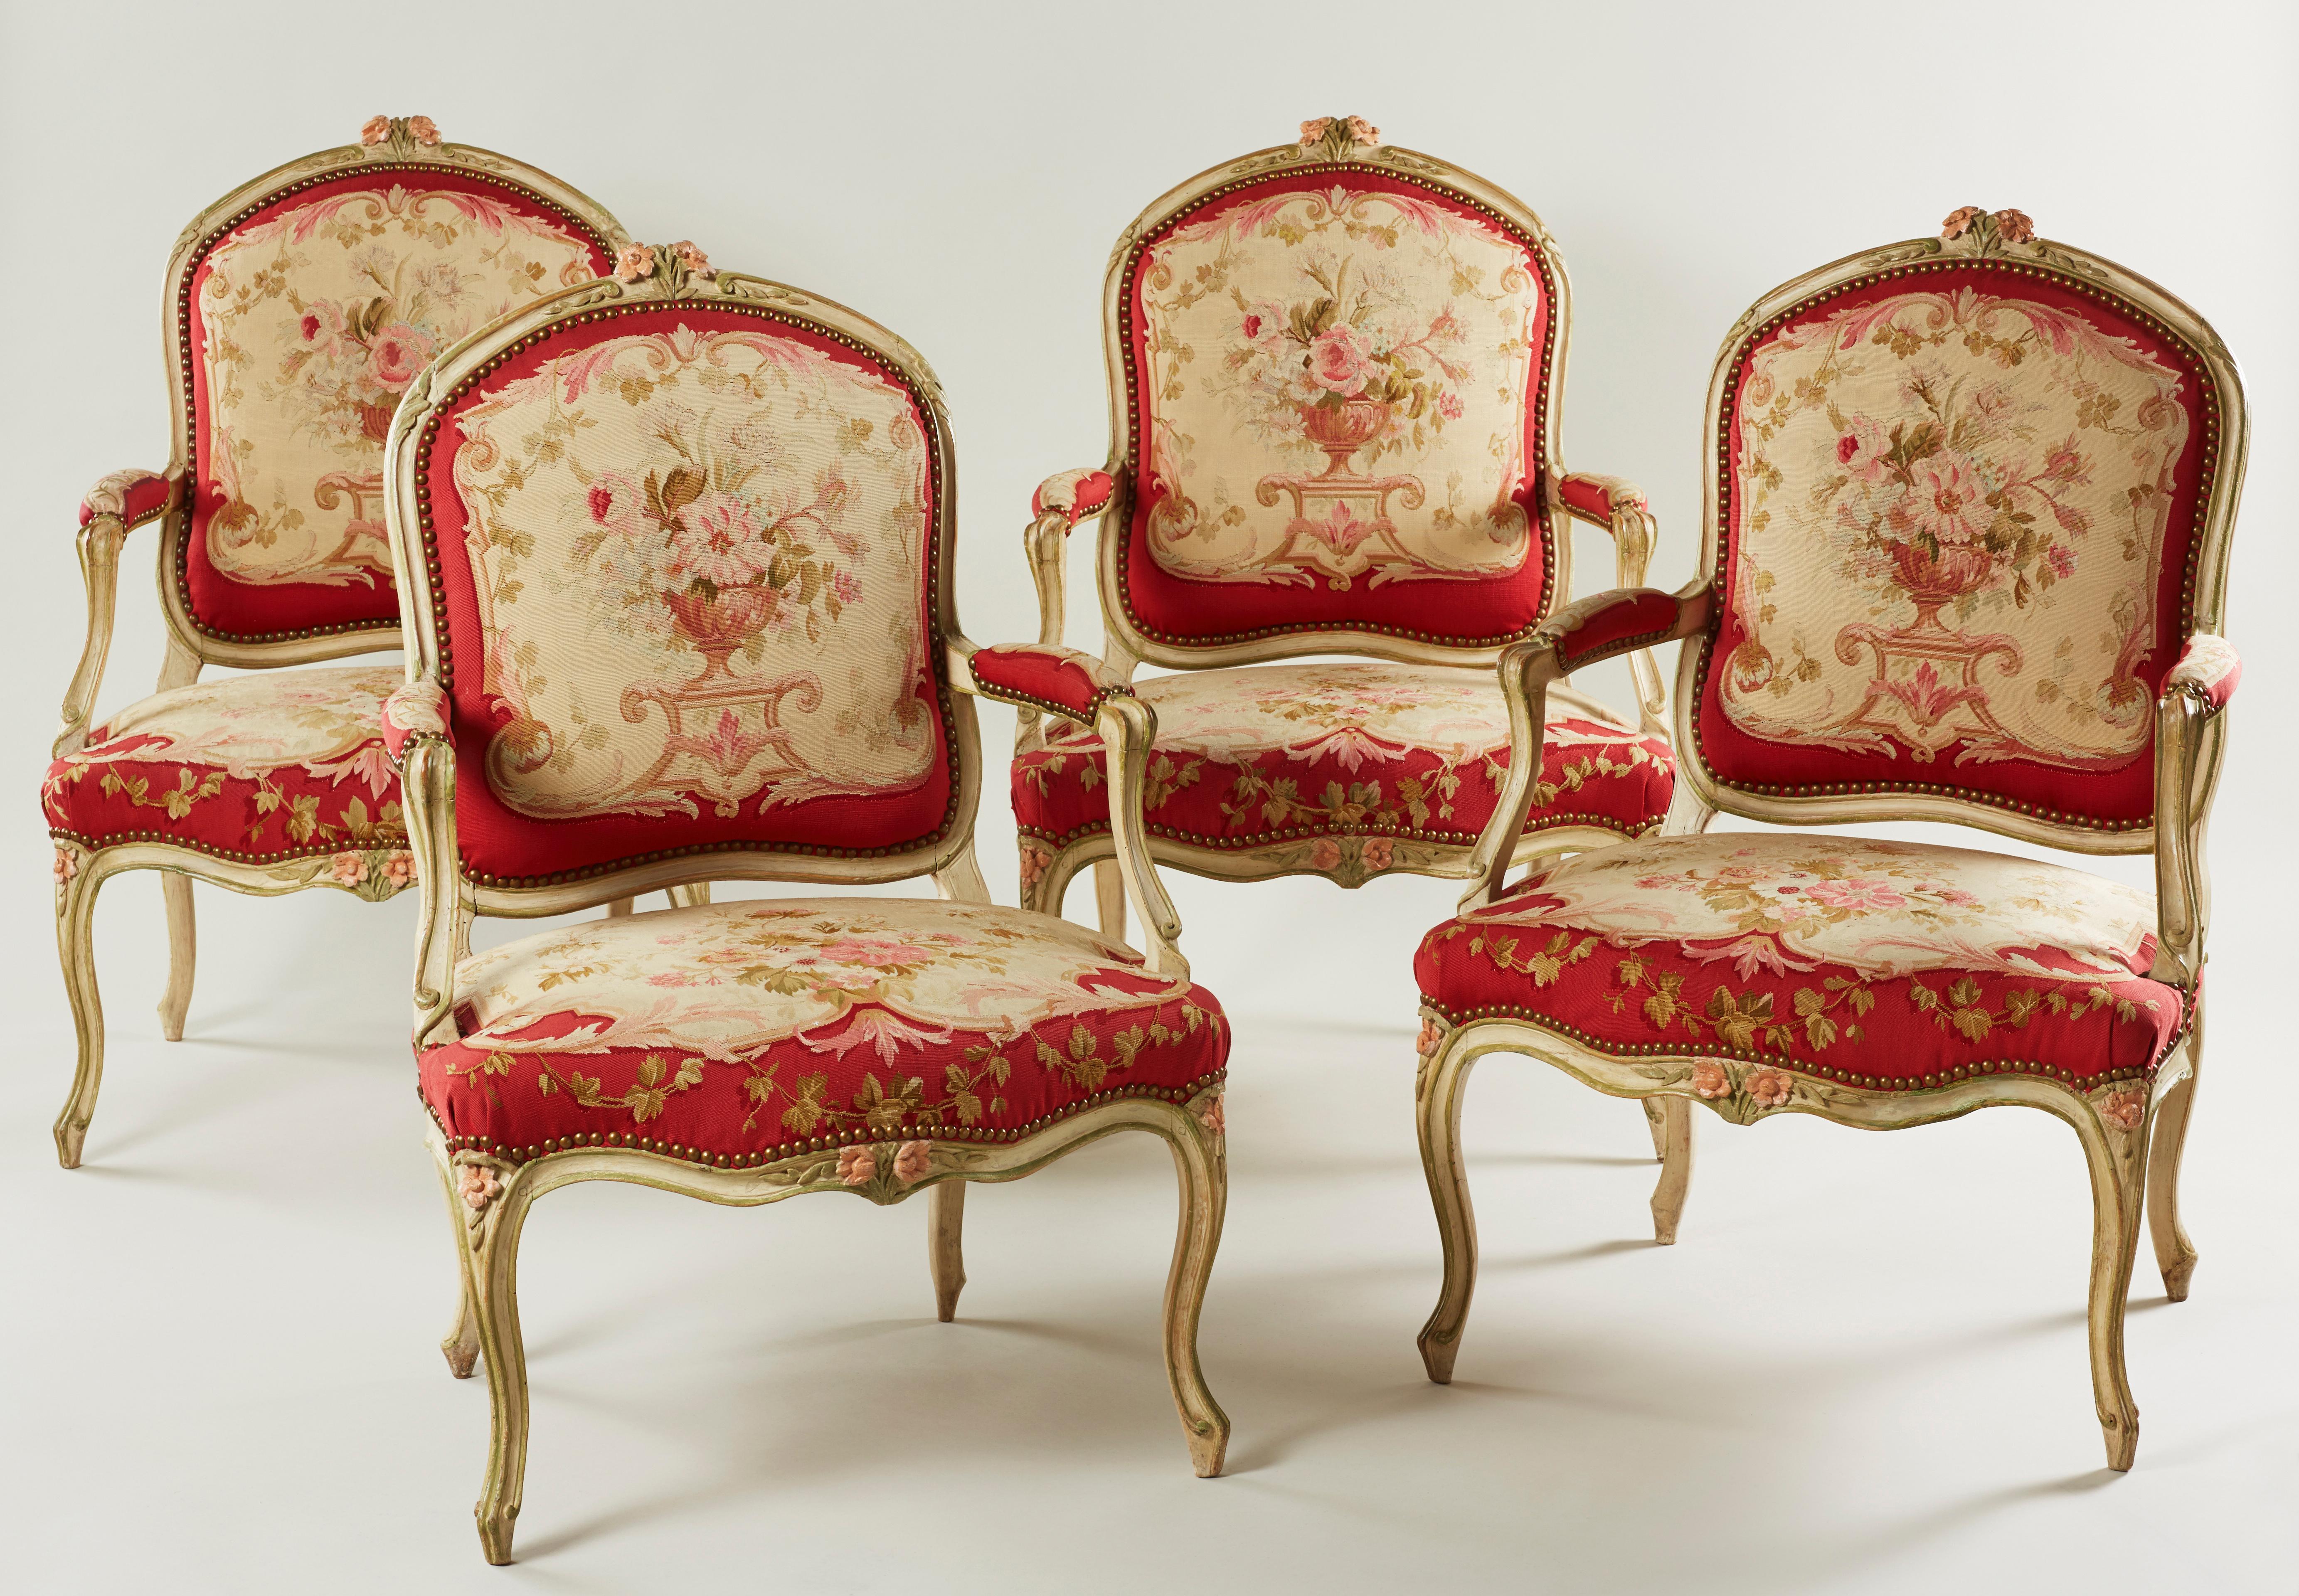 A rare and attractive set of four period Louis XV pale green and rose painted armchairs. Each with a flowerhead and foliate carved toprail, padded and scrolled arms and a serpentine seat, upholstered in brass studded 19th century Aubusson style